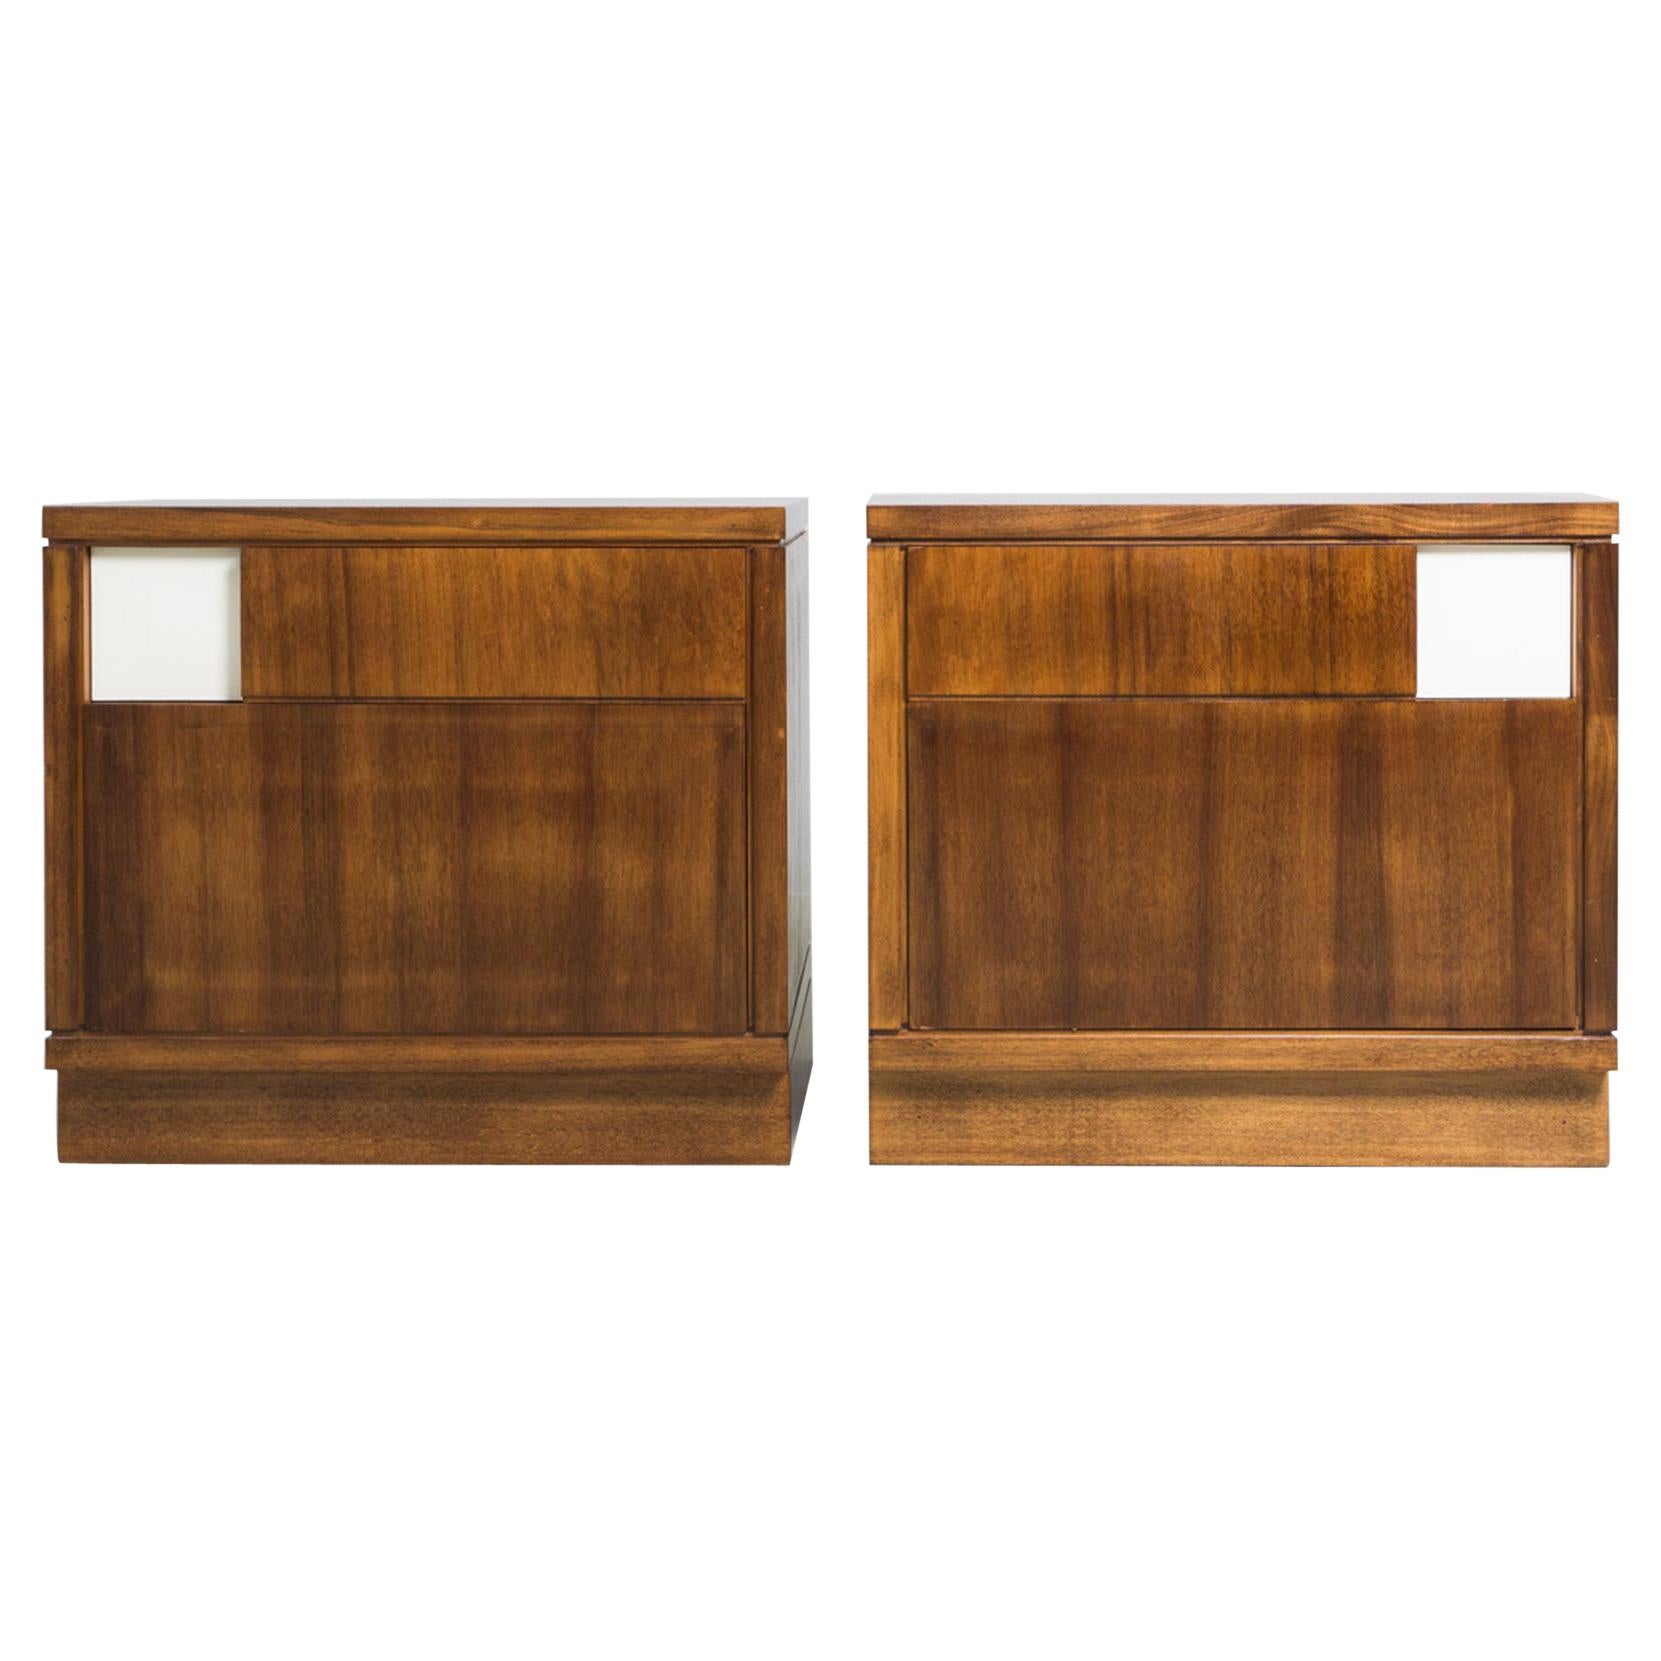 Set of Bed Side Tables, Walnut, Ico Parisi, 1960